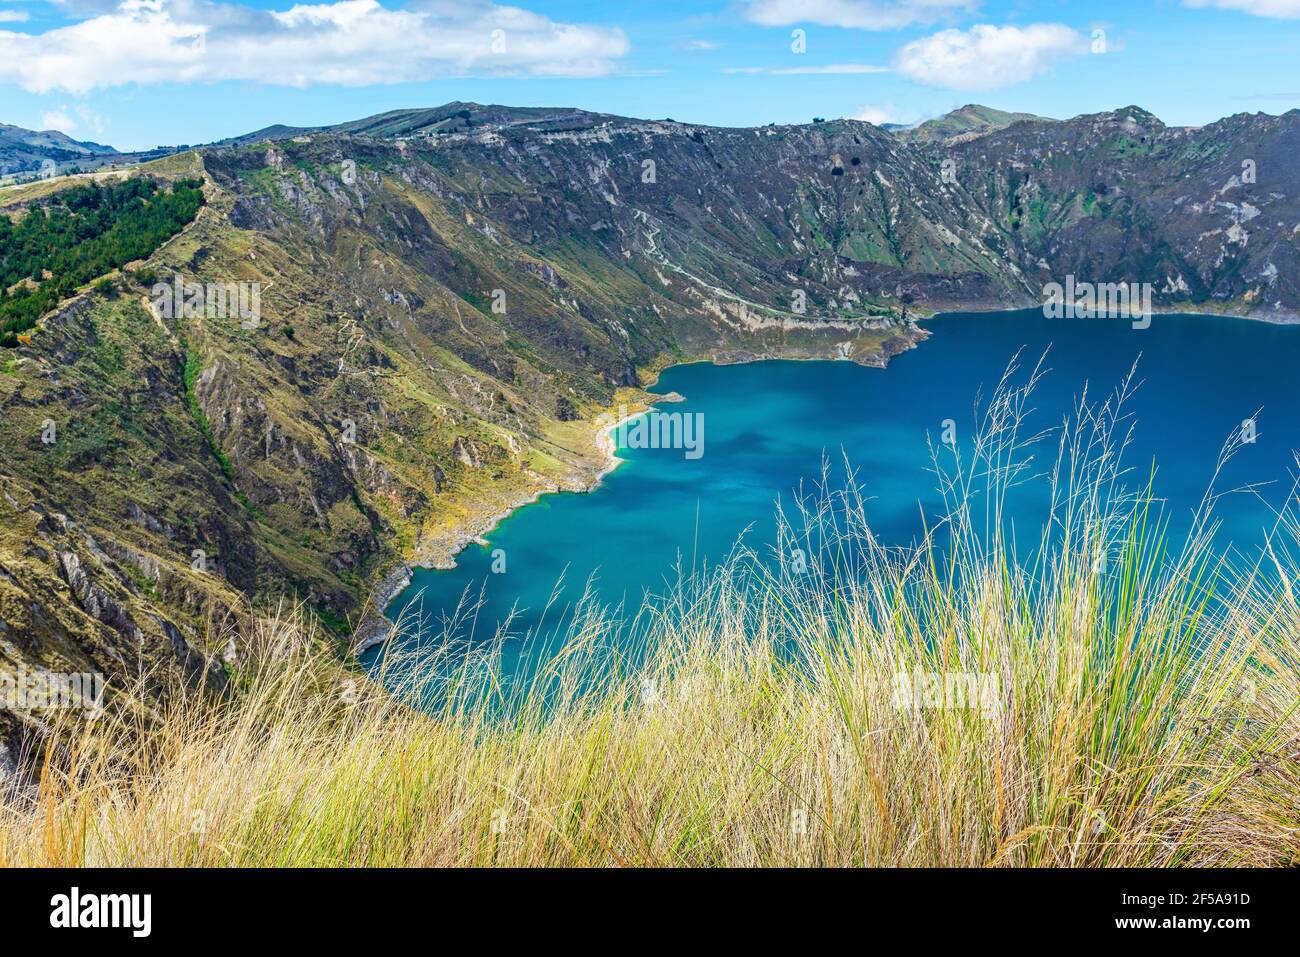 Andes grass with Quilotoa volcanic crater lagoon in background along the Quilotoa Loop hike, Quito region, Ecuador. Focus on grass. Stock Photo